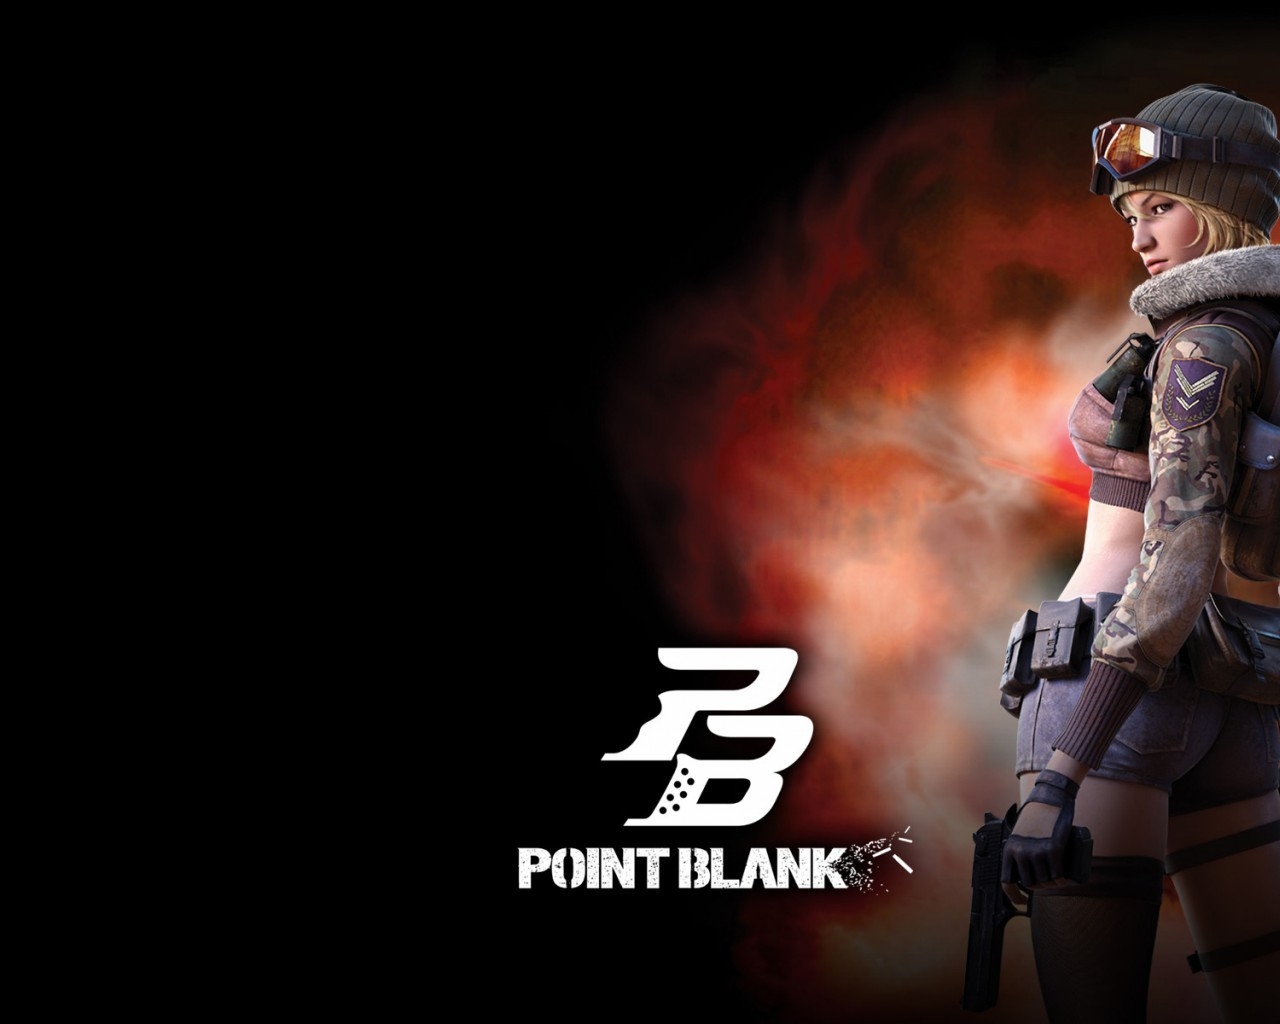 Point Blank Poster for 1280 x 1024 resolution